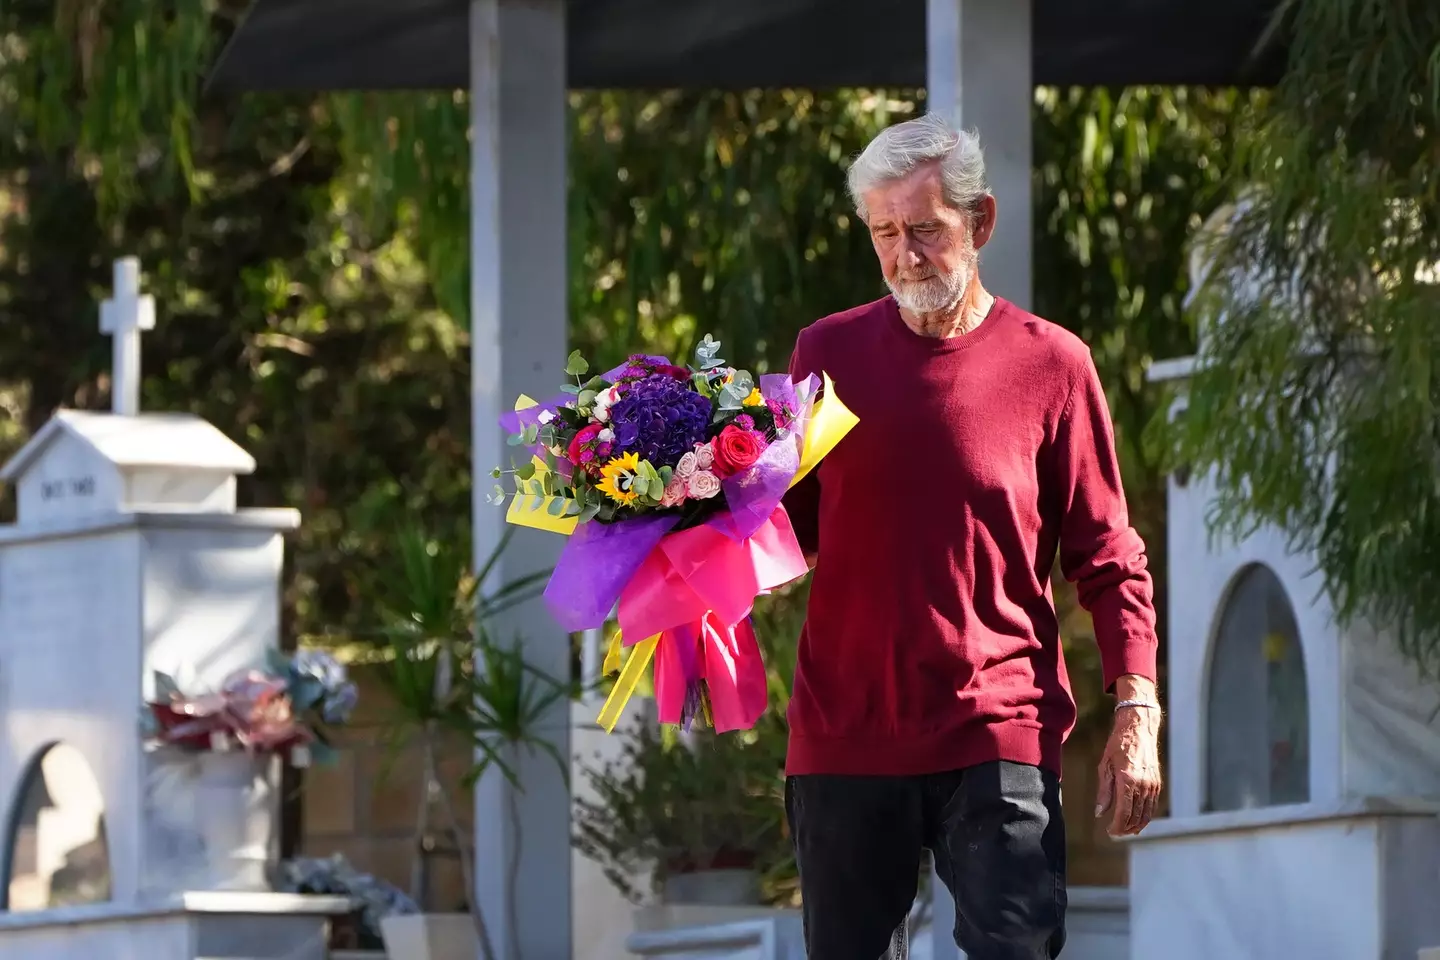 David Hunter laid flowers at the grave of his wife at a cemetery in Paphos, Cyprus.